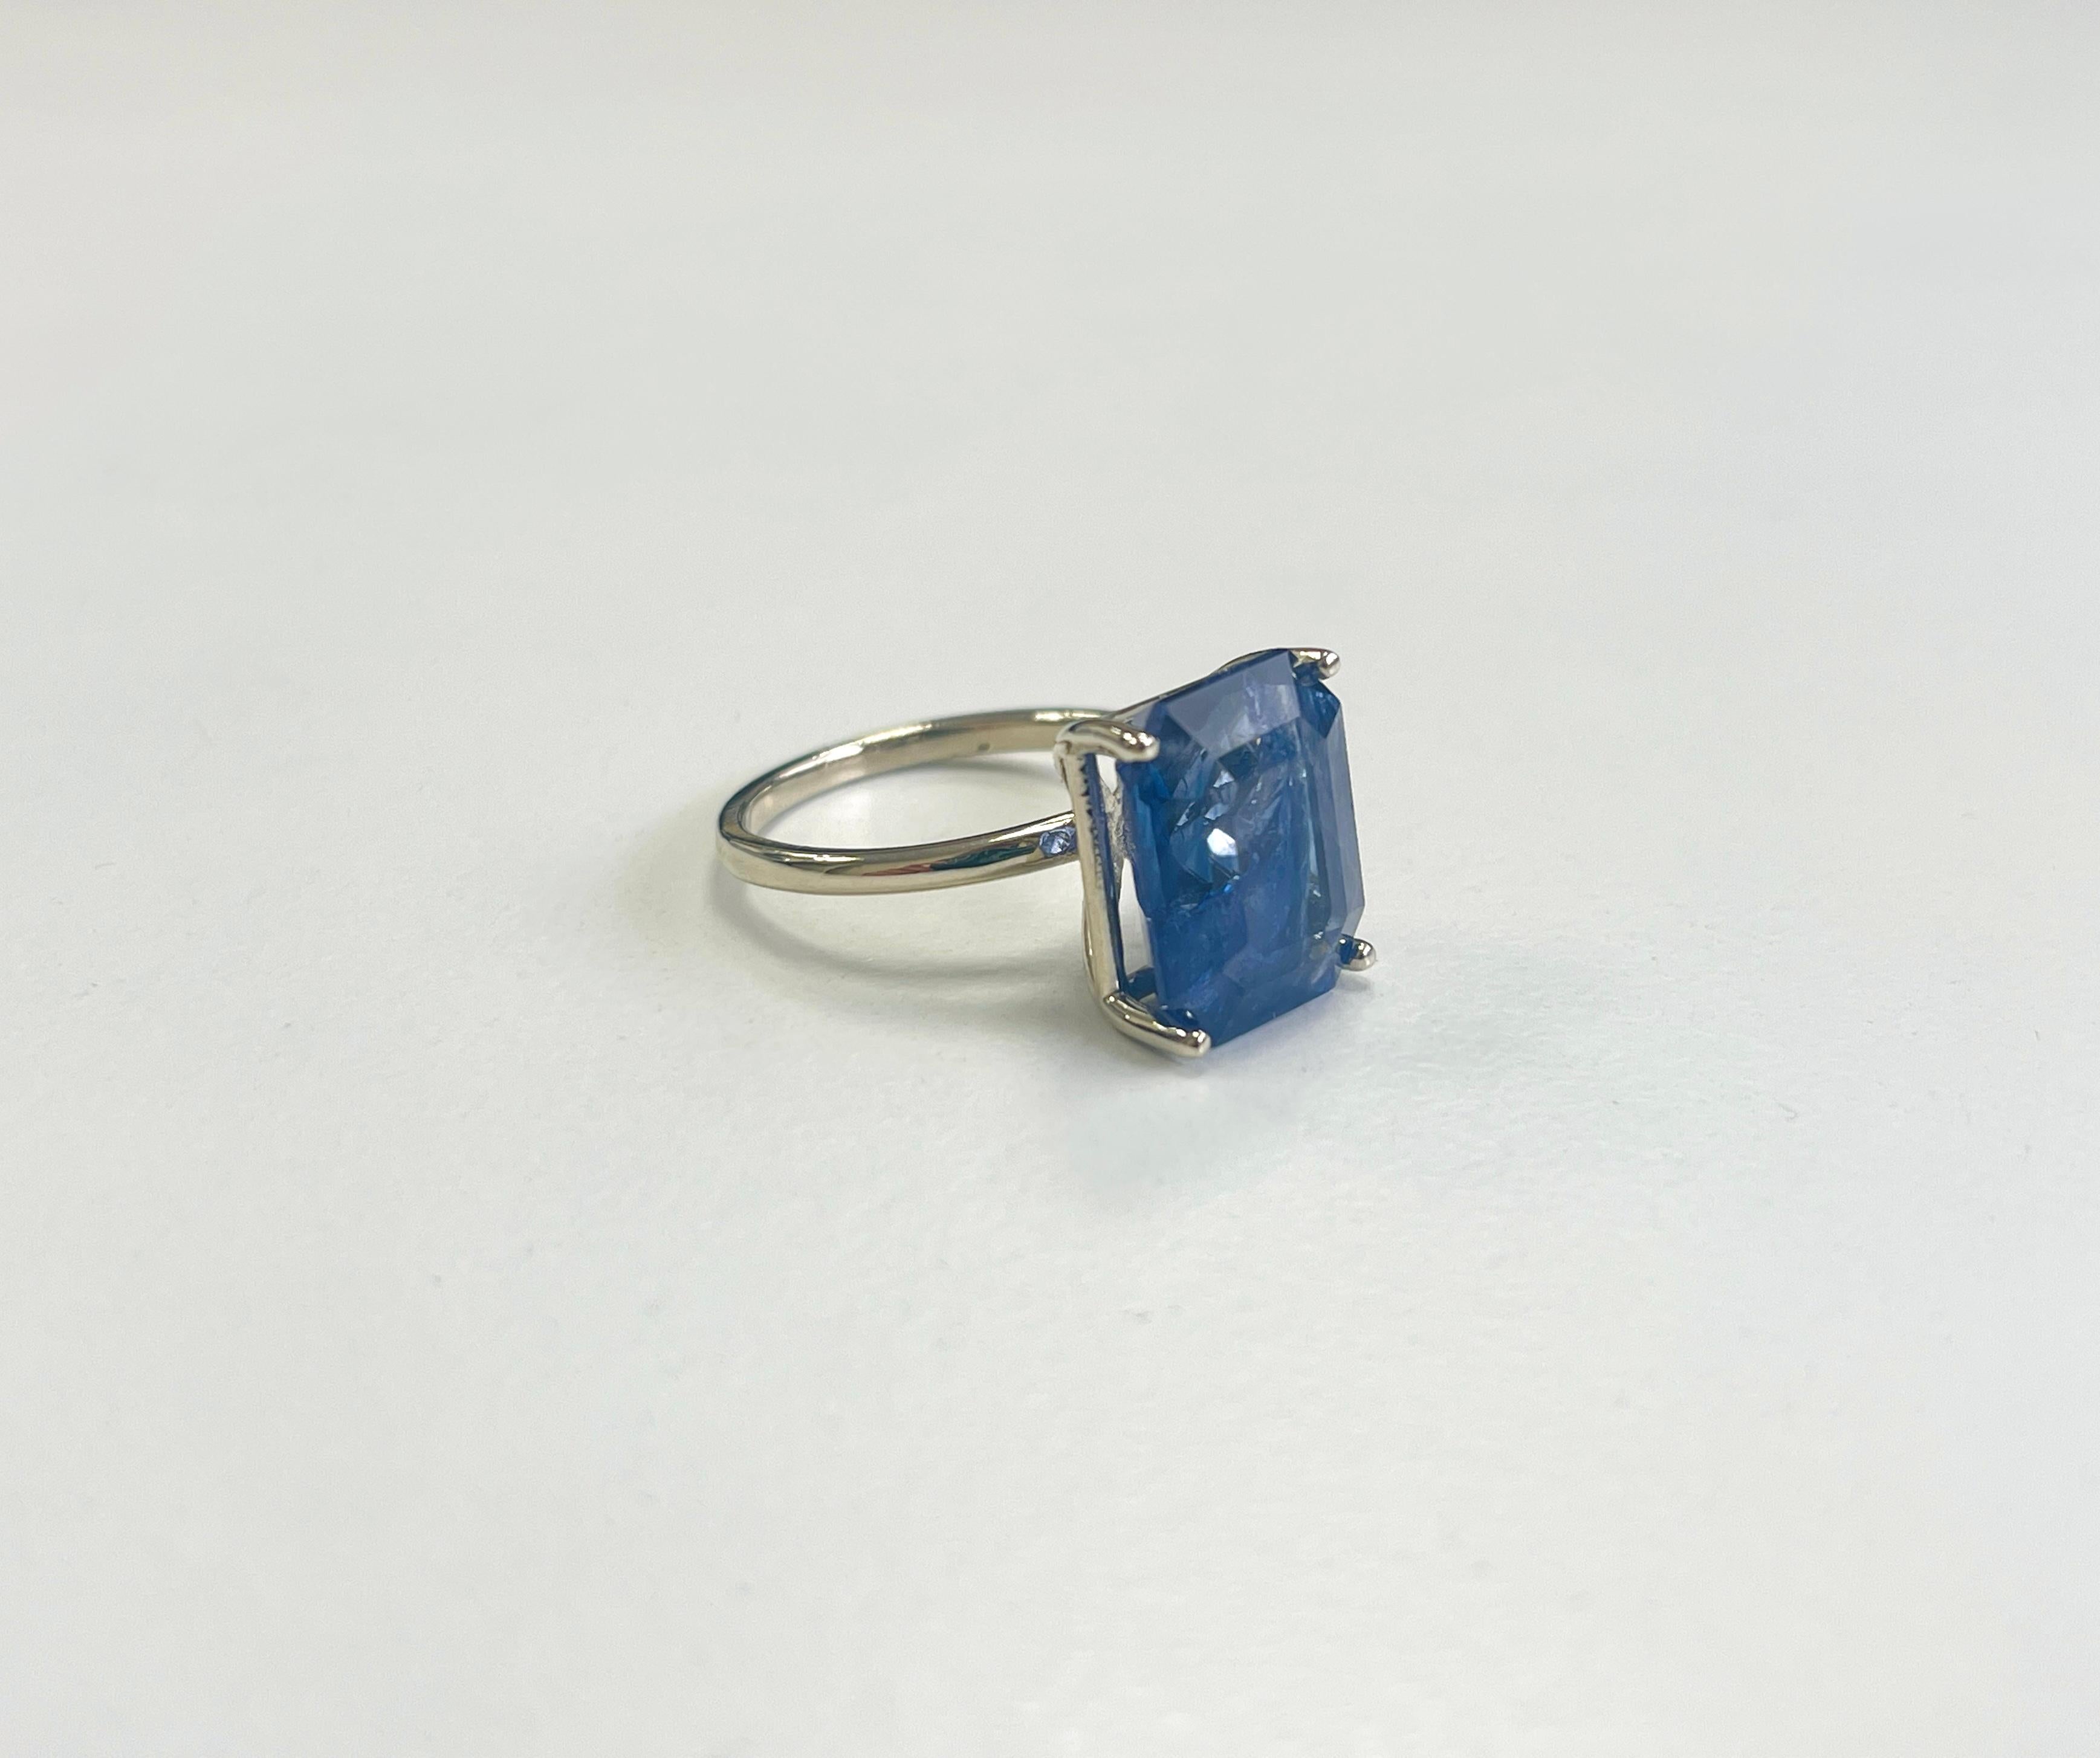 10.79 Carat Natural Sapphire Intense Blue in 14K White Gold Ring In New Condition For Sale In Great Neck, NY